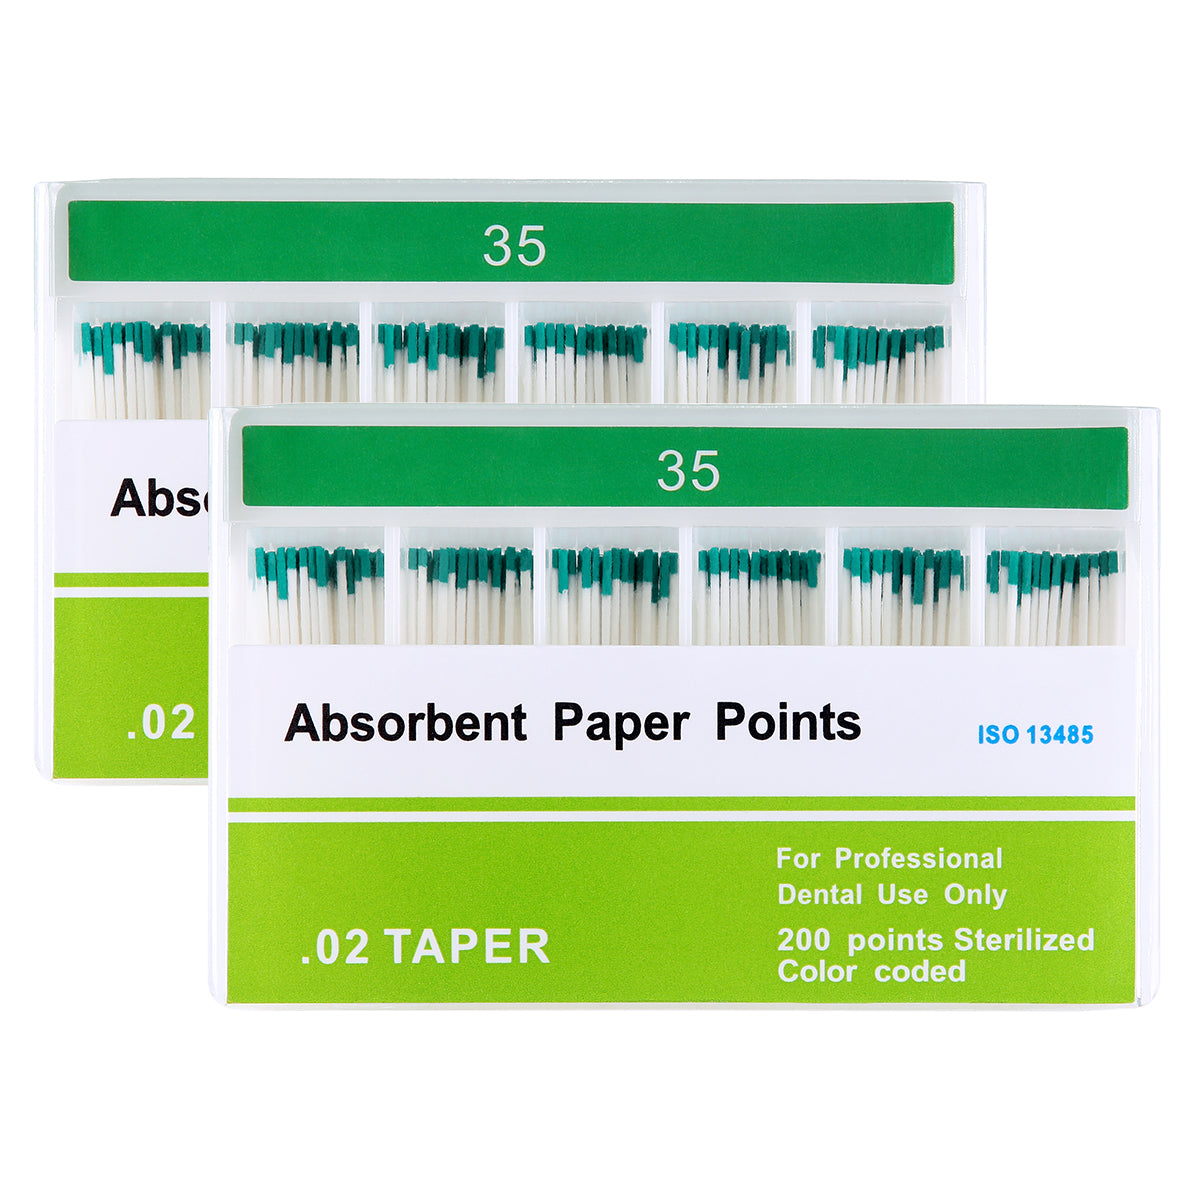 2 Boxes Absorbent Paper Points #35 Taper Size 0.02 Color Coded 200/Box - azdentall.com